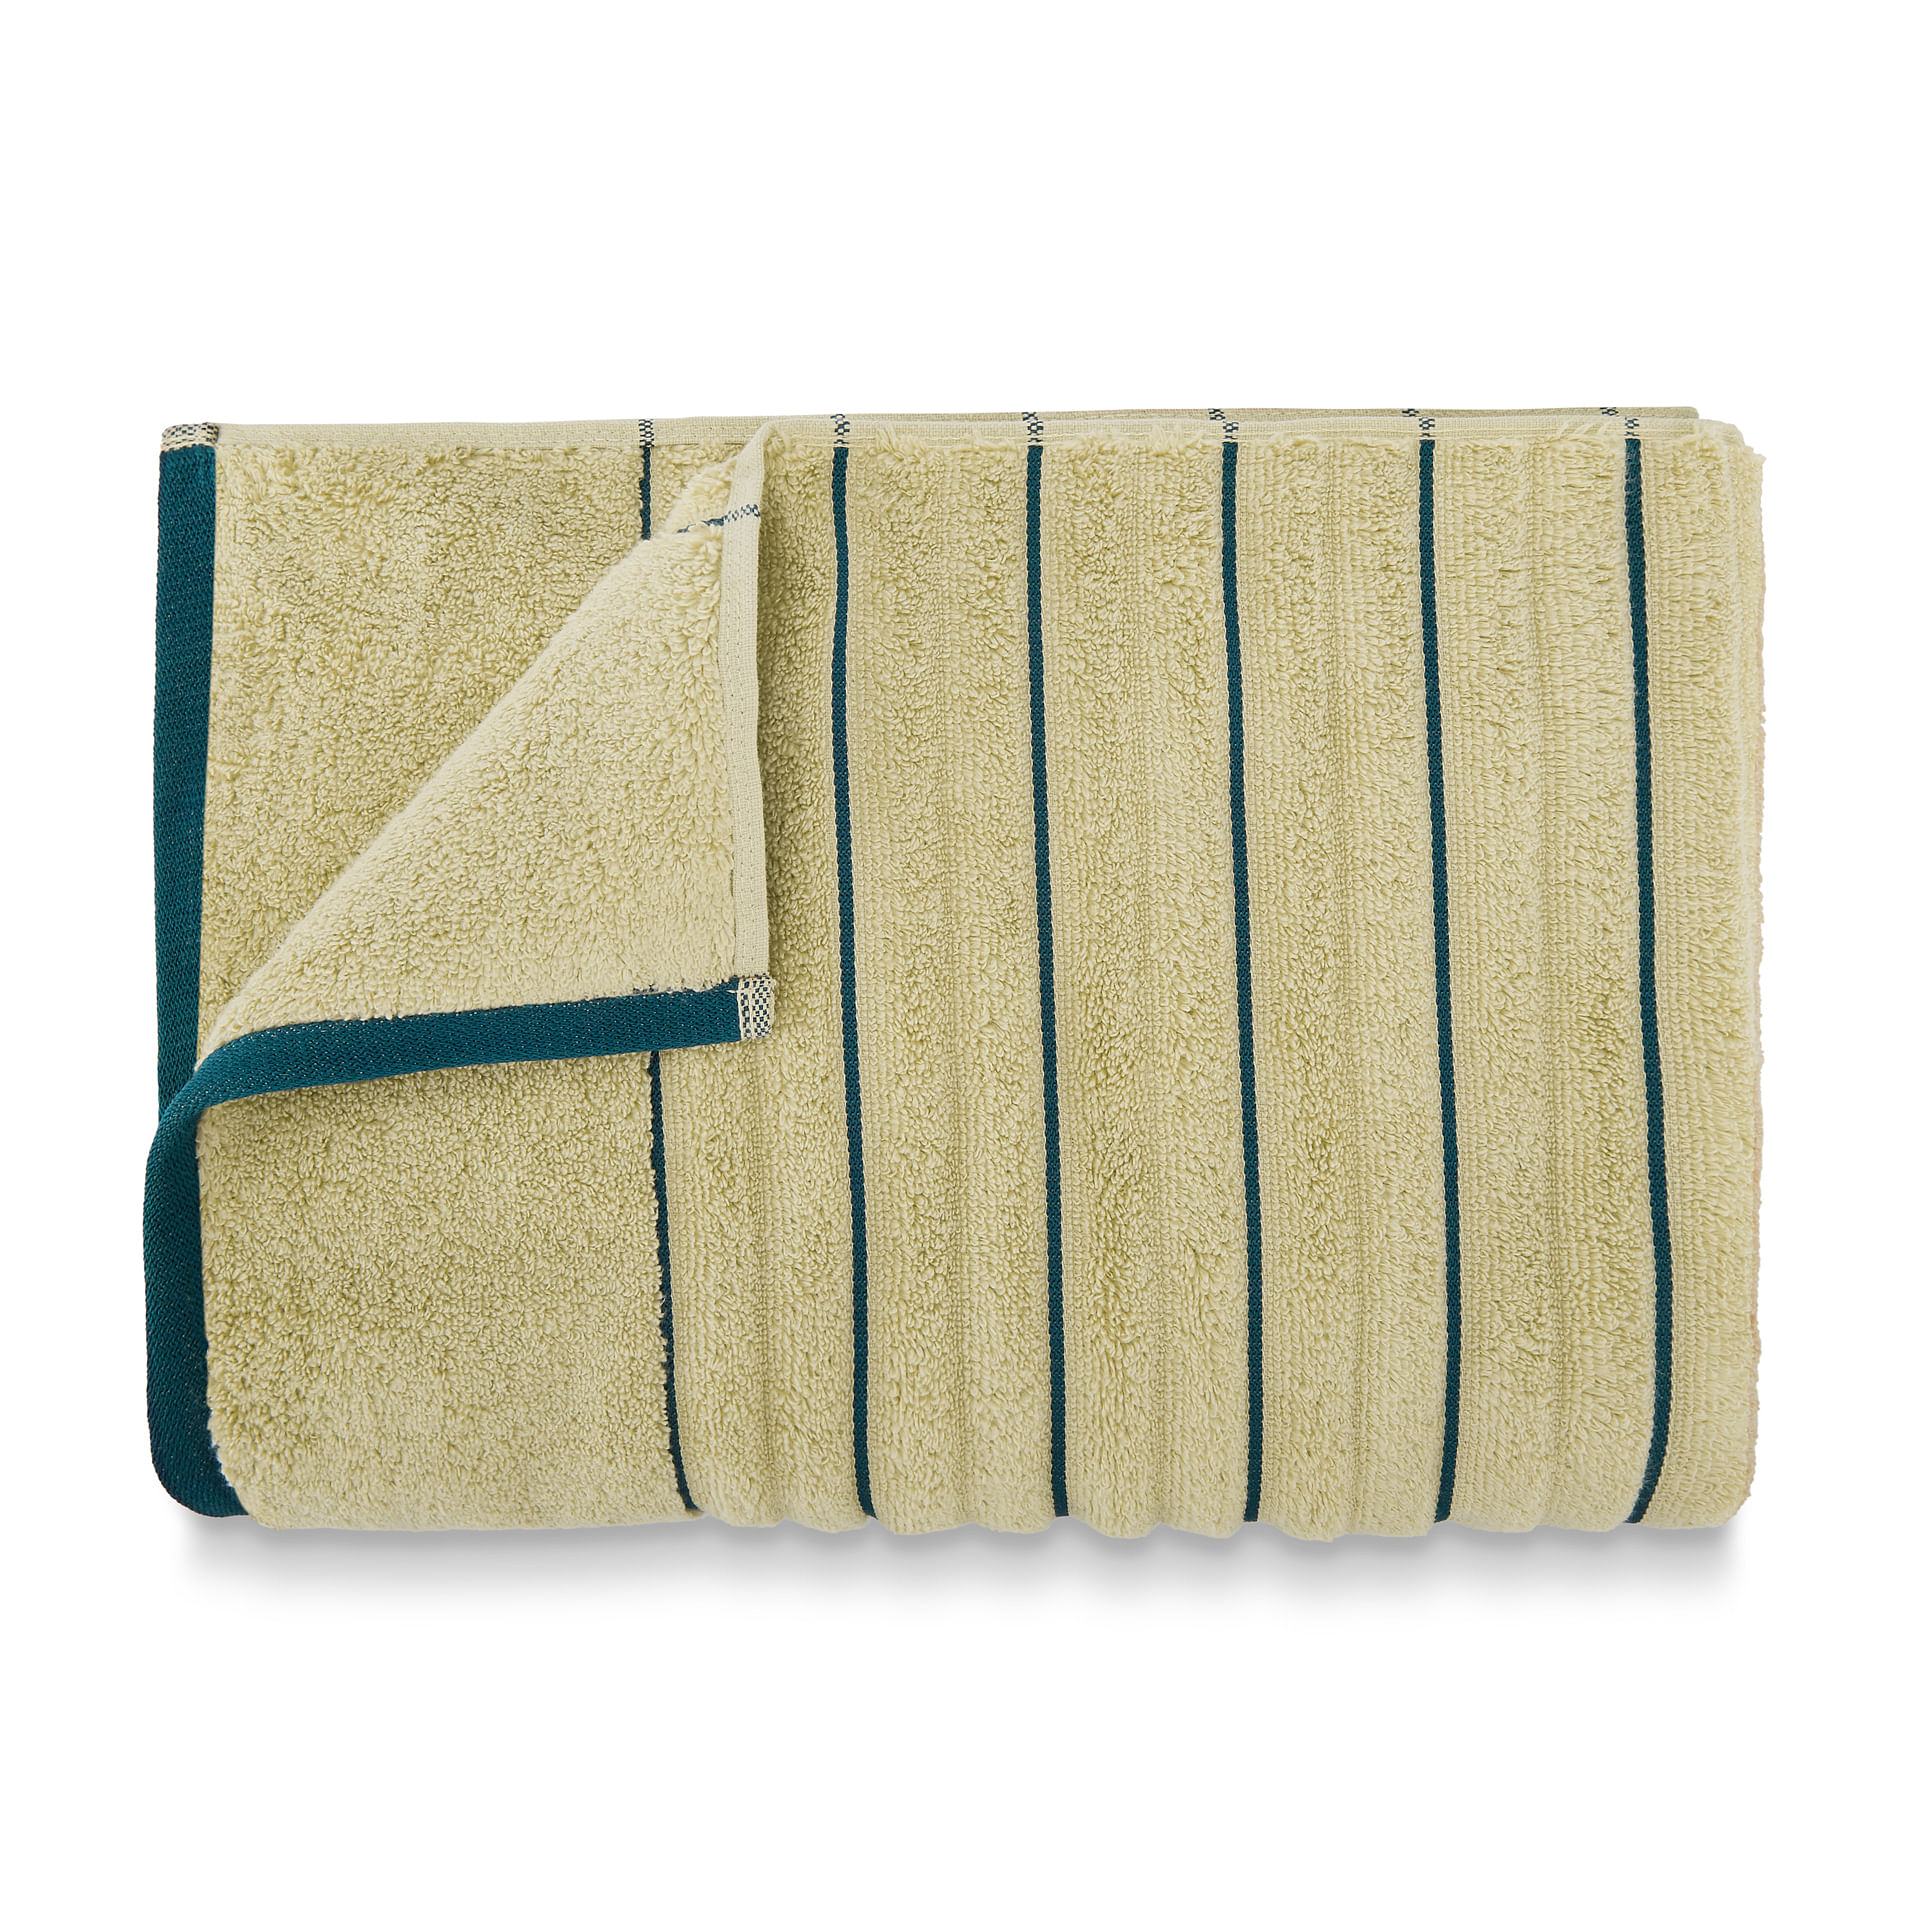 Spaces Exotica Ribbed Cotton Bath Towels in Dessert-Teal Colour